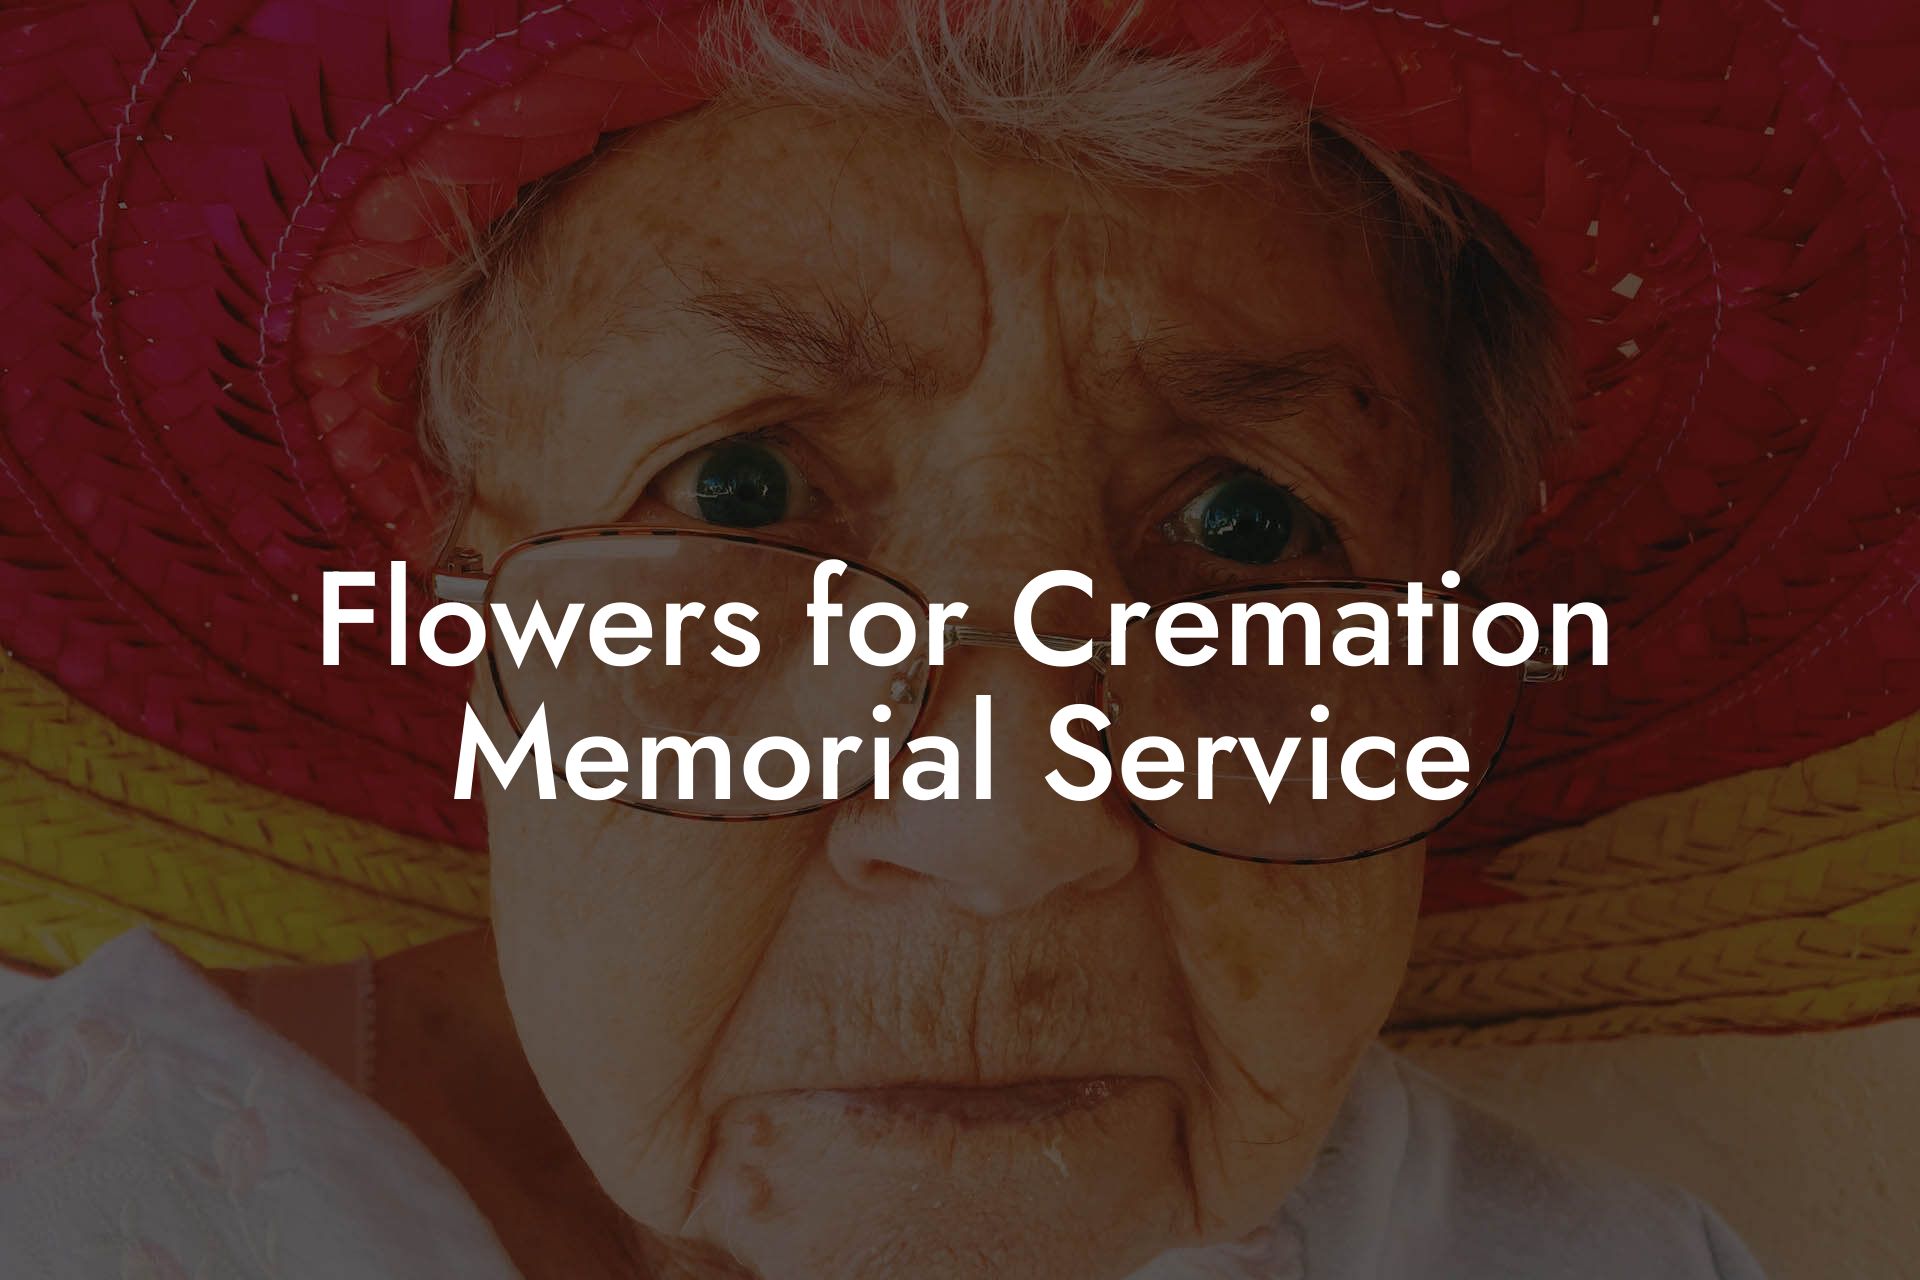 Flowers for Cremation Memorial Service